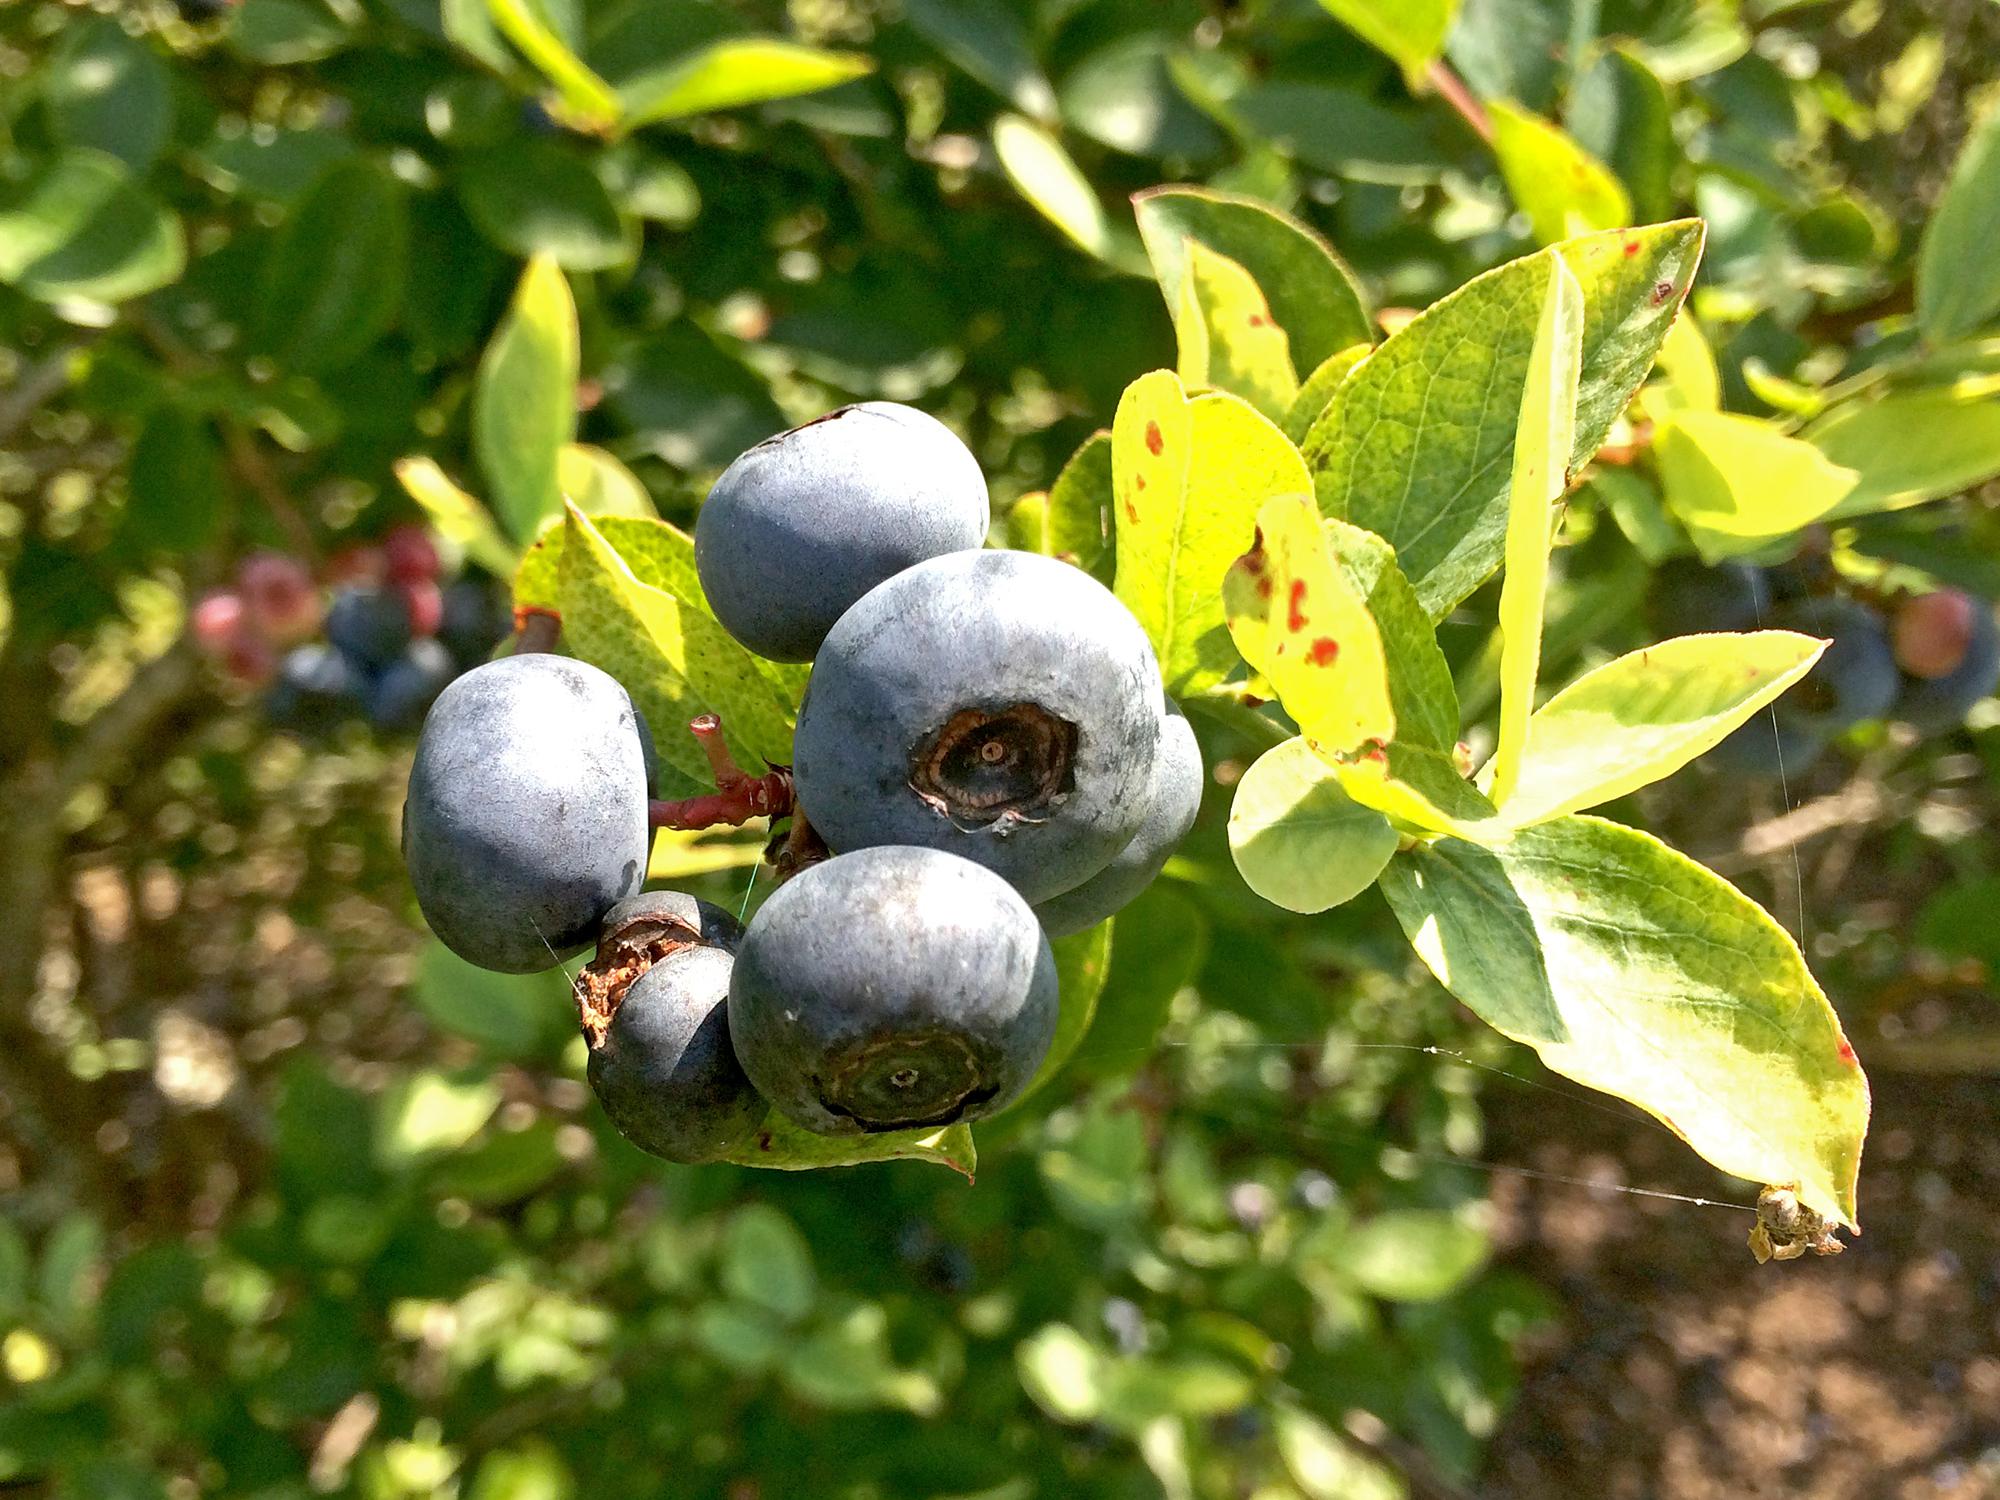 Blueberries are ripe for the picking across much of the state if rains will allow opportunities for harvest. Bushes are loaded with berries, such as these photographed on June 2, 2015, in Poplarville, Mississippi. (Photo by Eric Stafne)